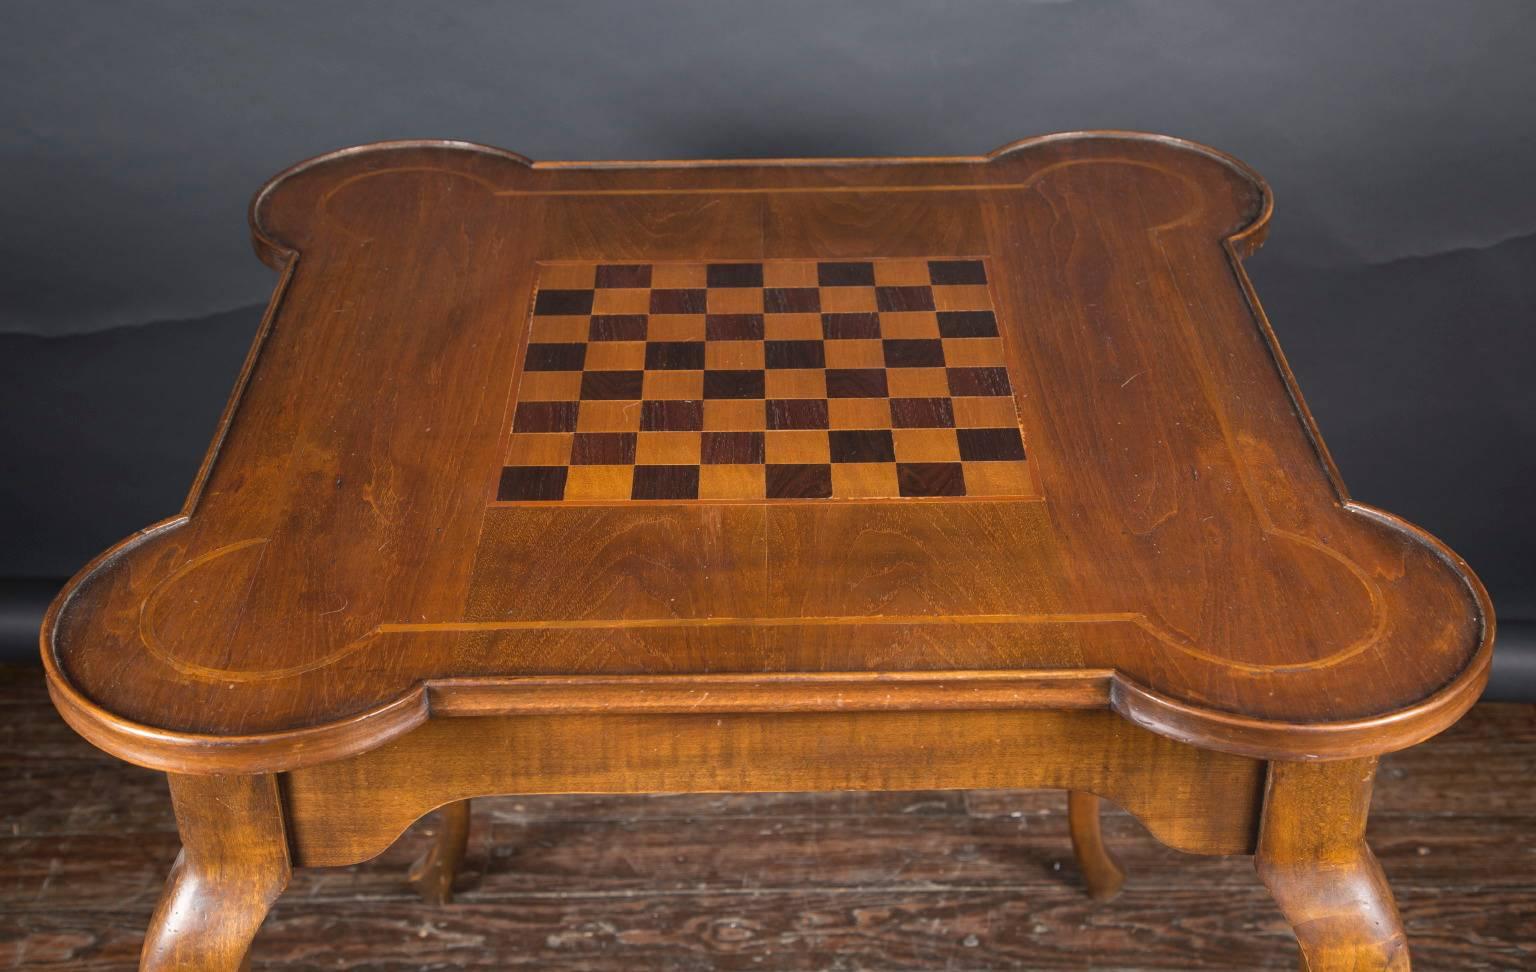 This Italian 20th century game table features an inlaid checkerboard top, a contoured banding inlay around circular curved corners and all sides, and beautifully curved cabriole legs. Its design is simple and full of movement, yielding a graceful